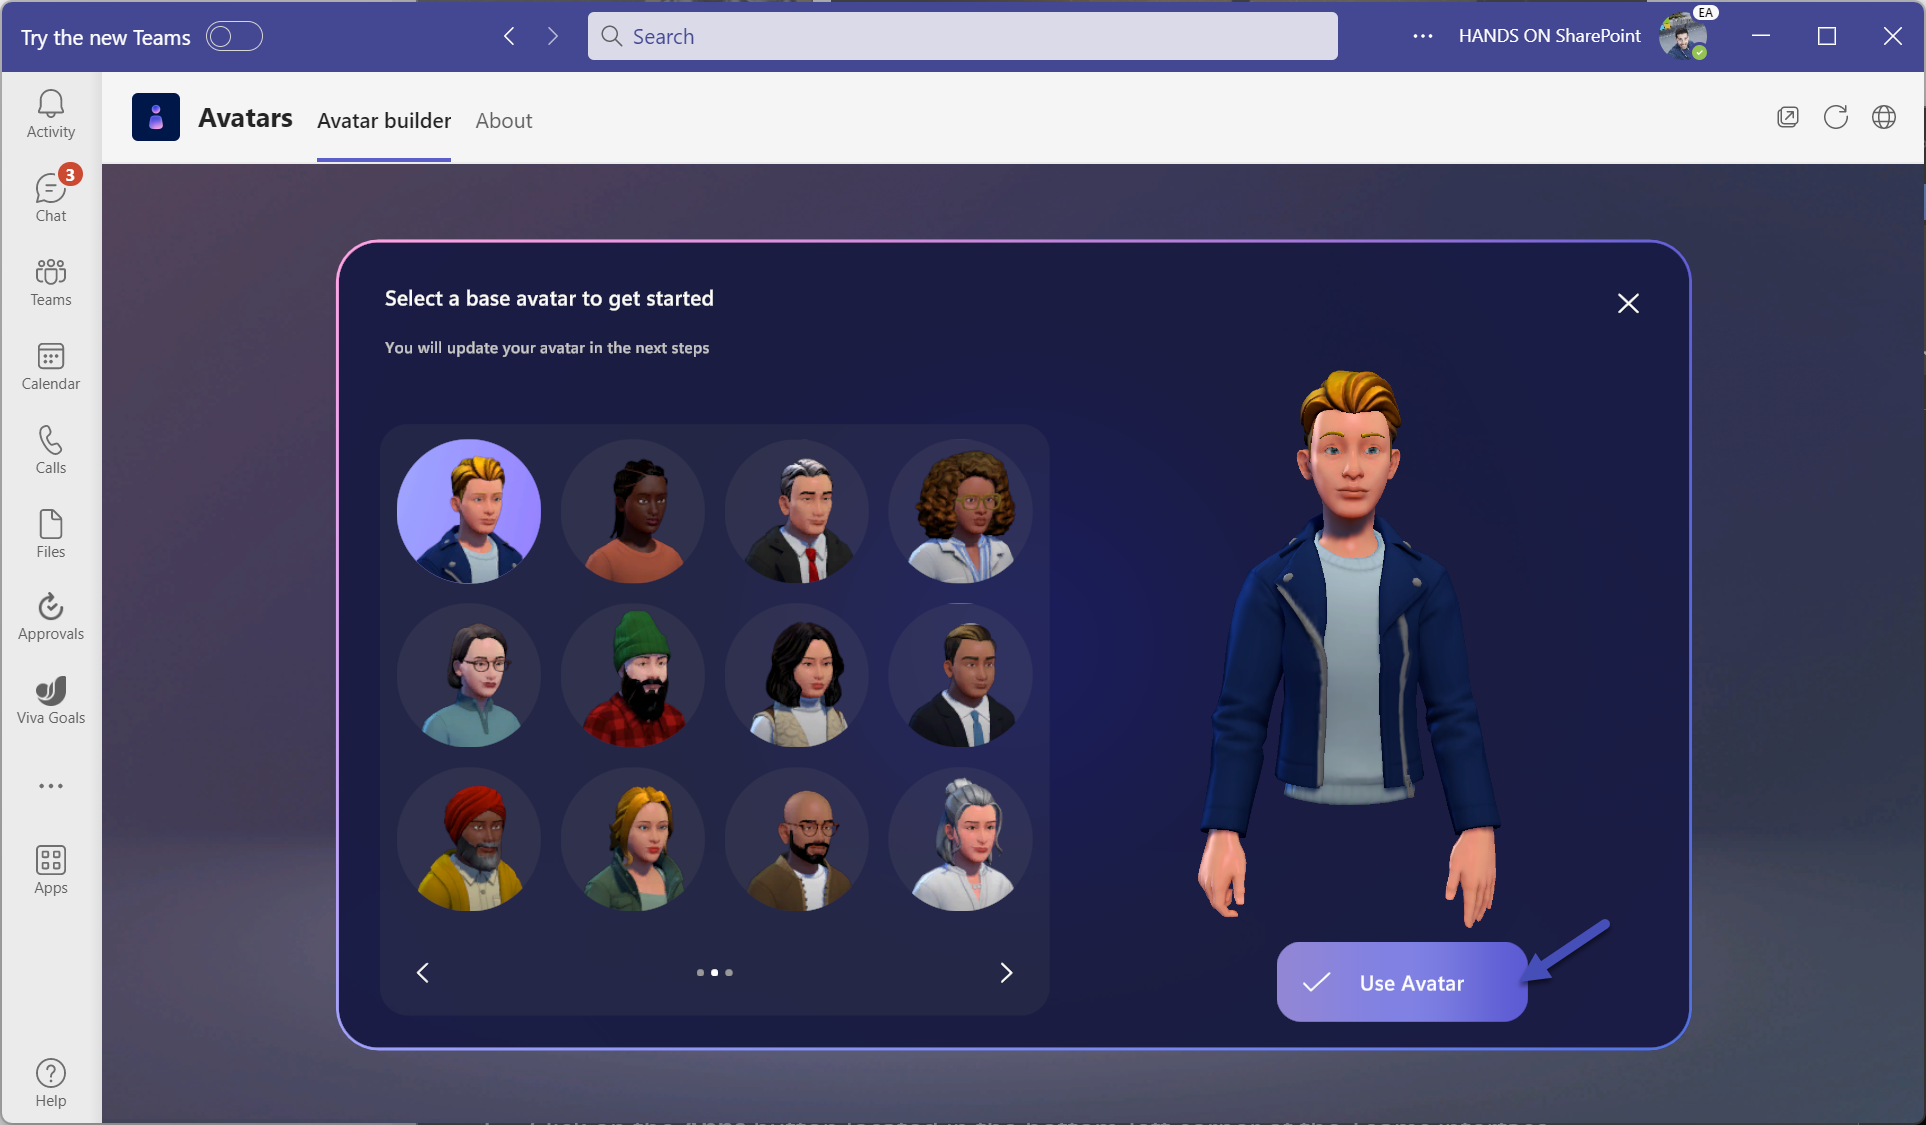 Microsoft Teams in VR and AR with 3D avatars  Parsa Land Company